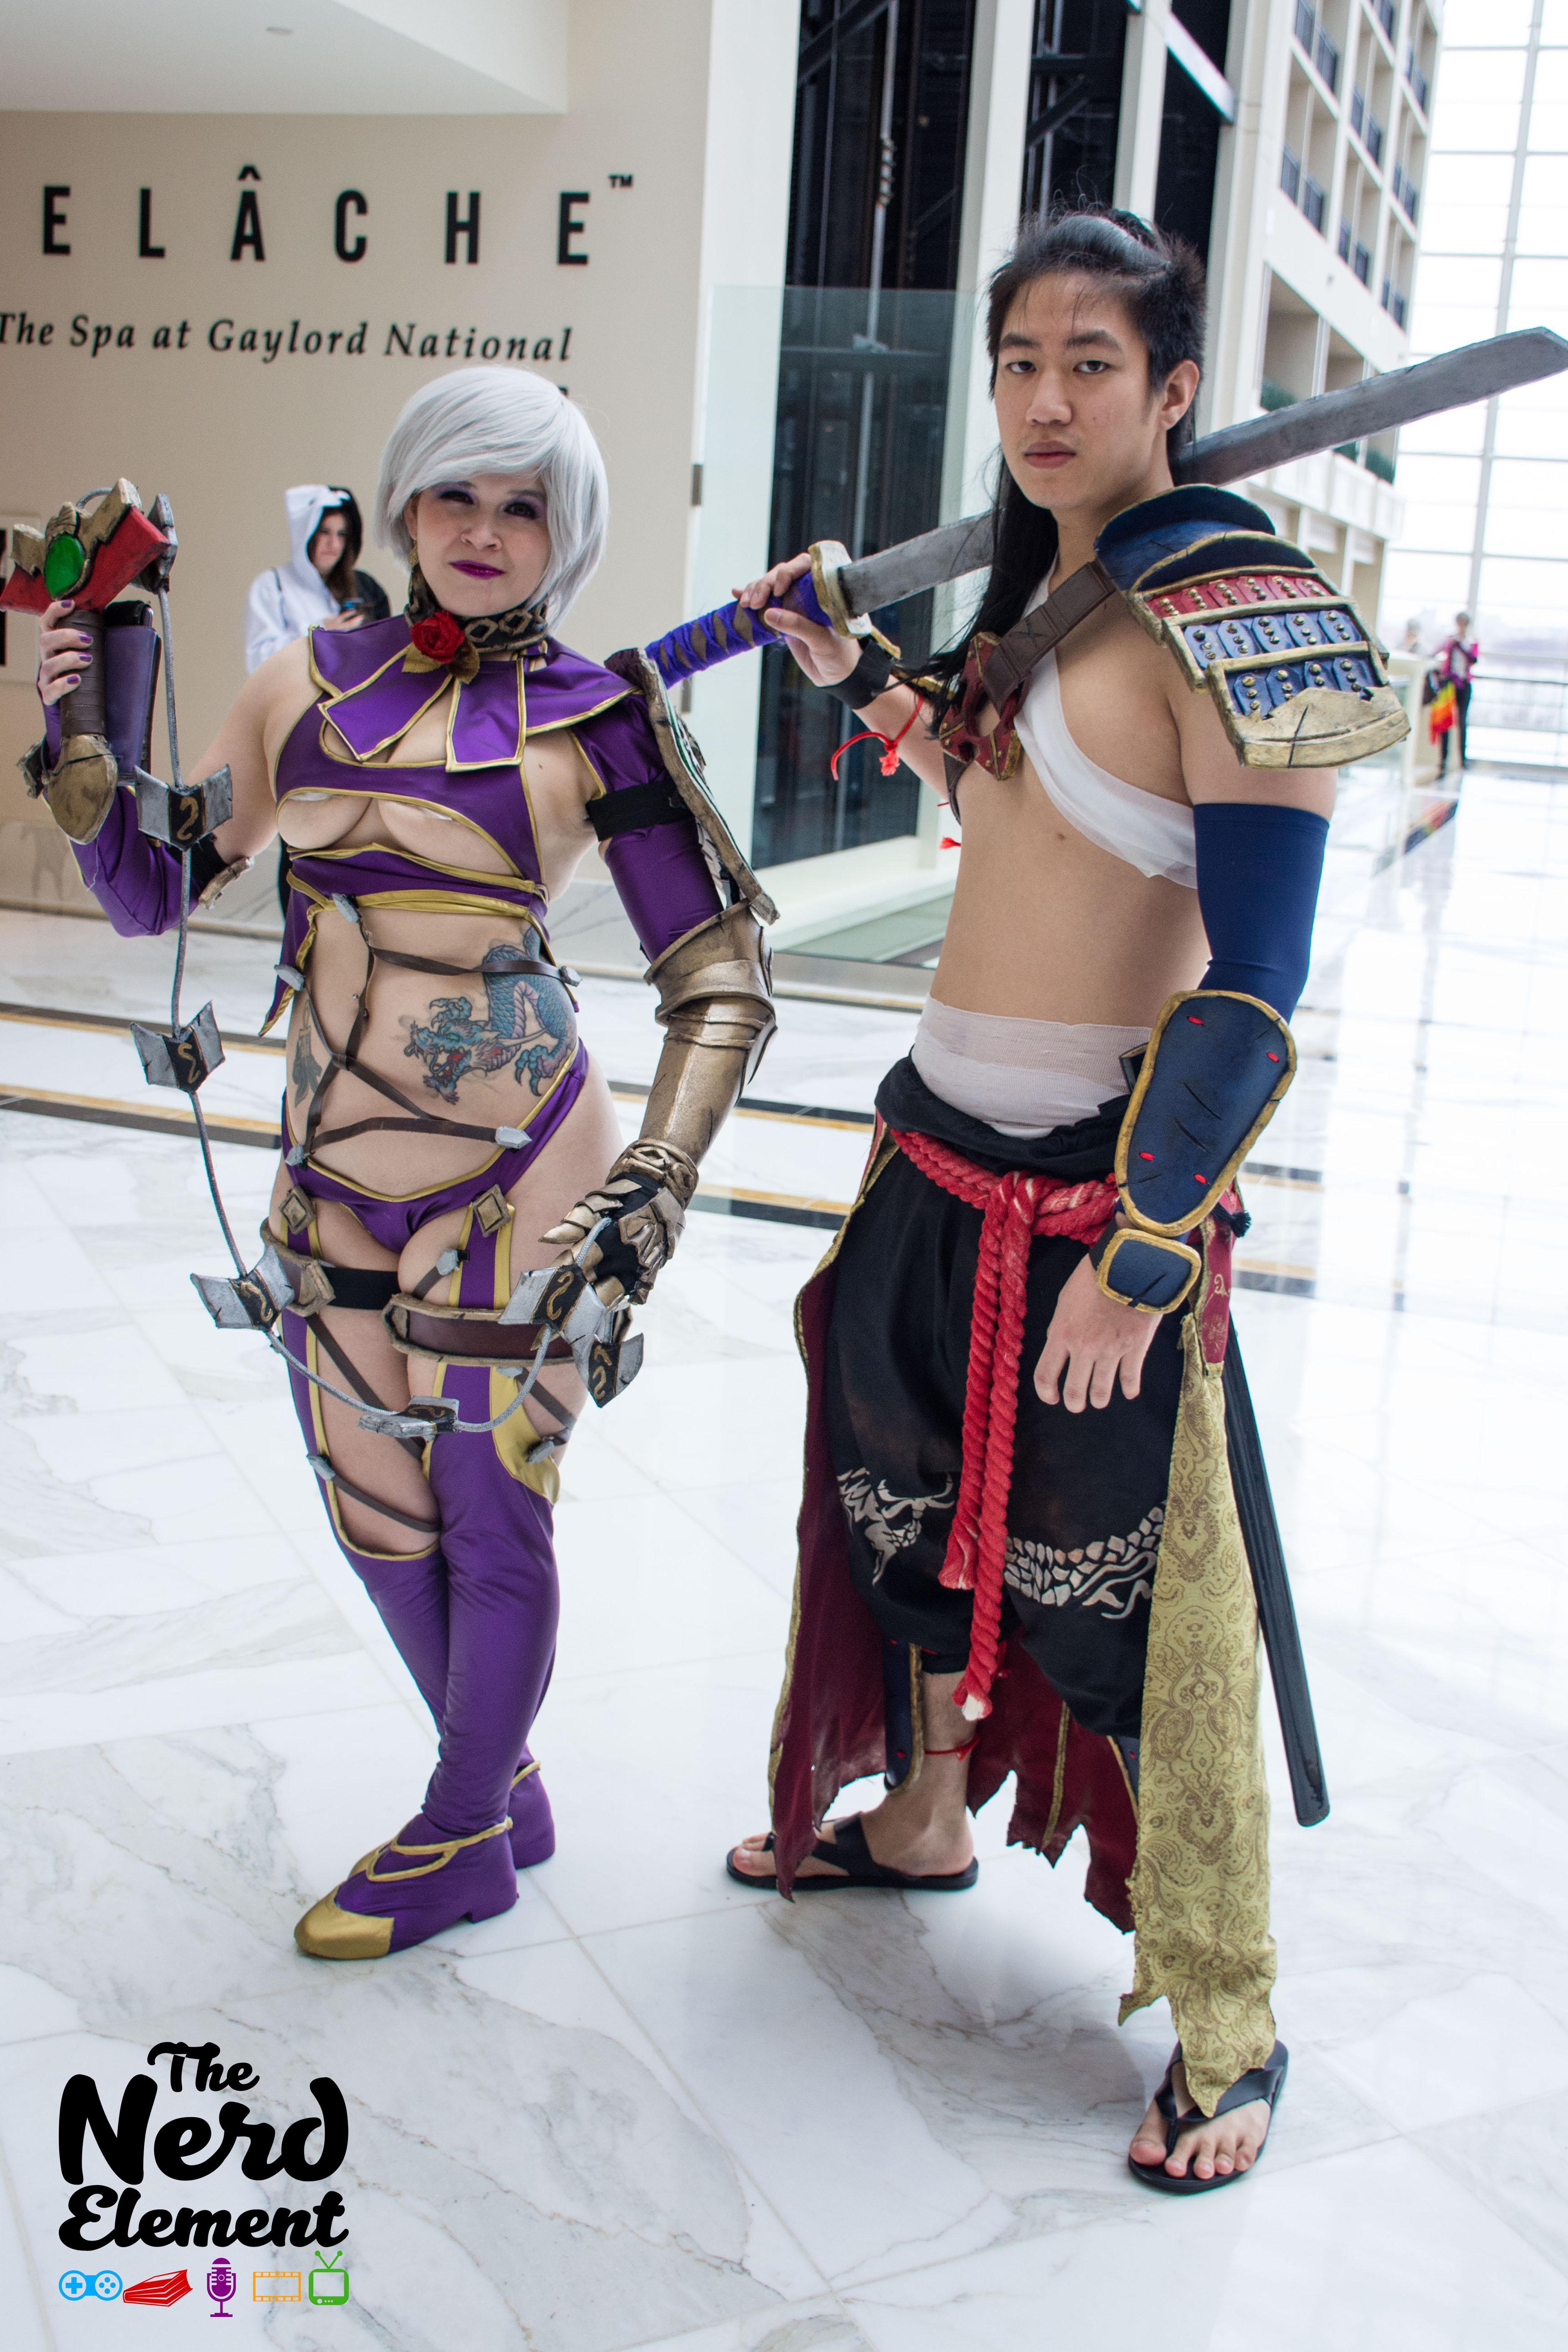 Ivy and Mitsurugi - Soul Calibur series
Cosplayers: Valkyrie Cosfit (fb) and hollandazemedia (ig)
